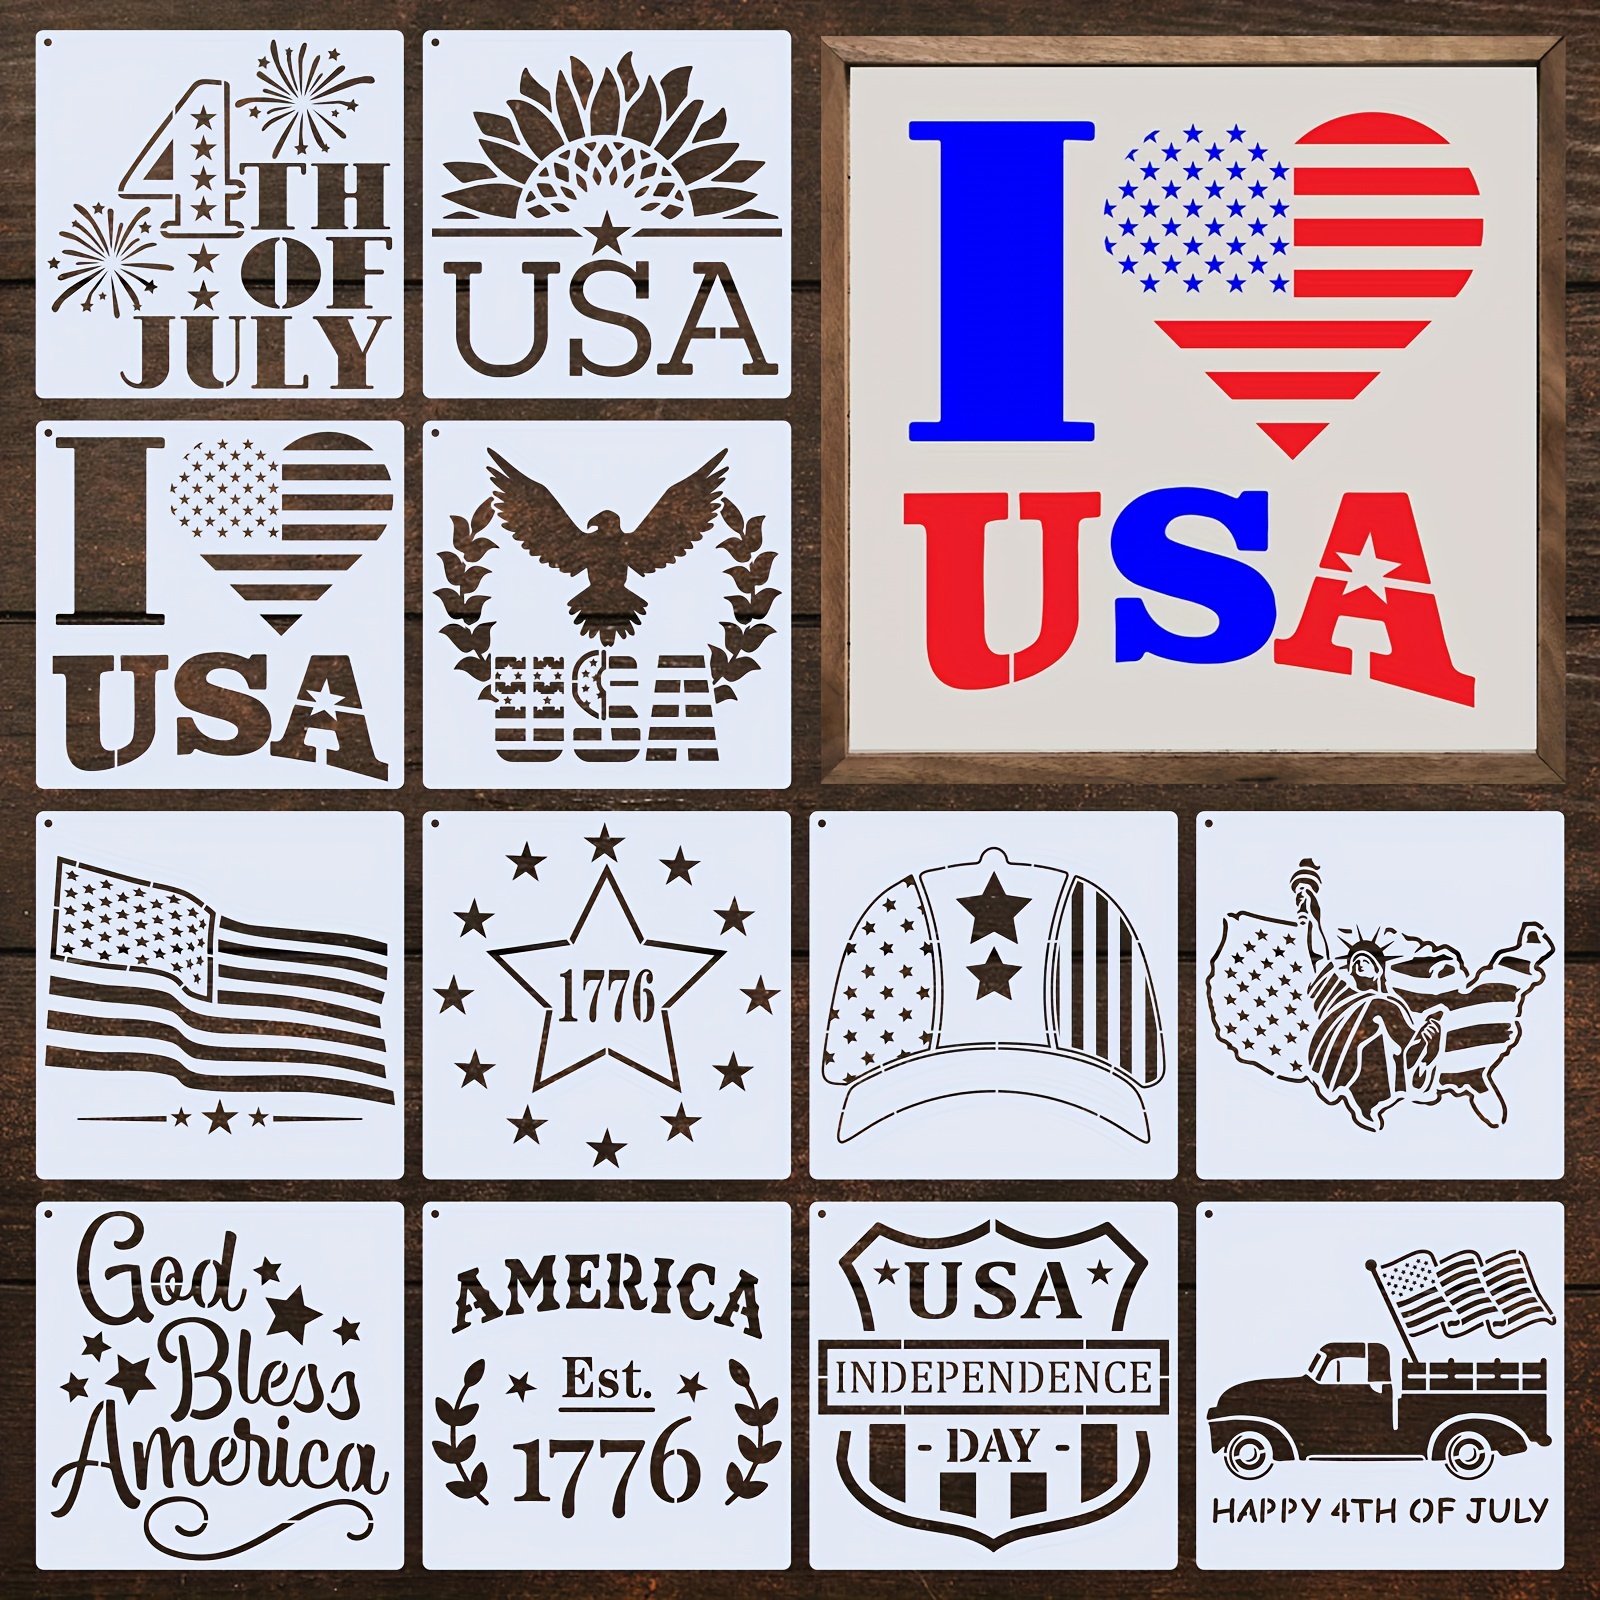 Star Stencil 50 Stars American Flag Template and 2 in 1 USA Flag Stencil for PAI